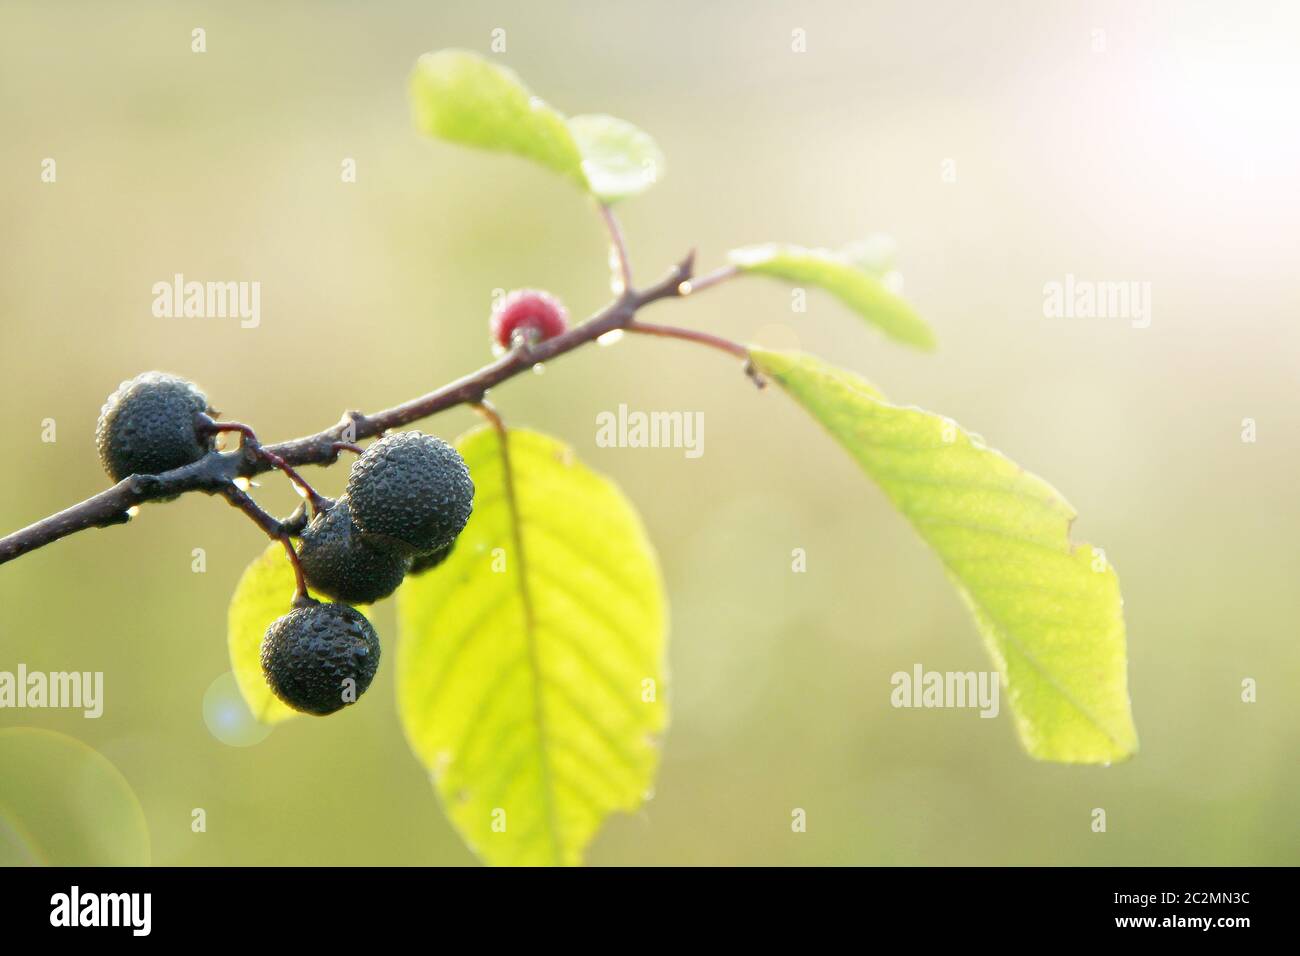 Branches of Frangula alnus with with black berries after rain. Fruits of Frangula alnus covered drop Stock Photo